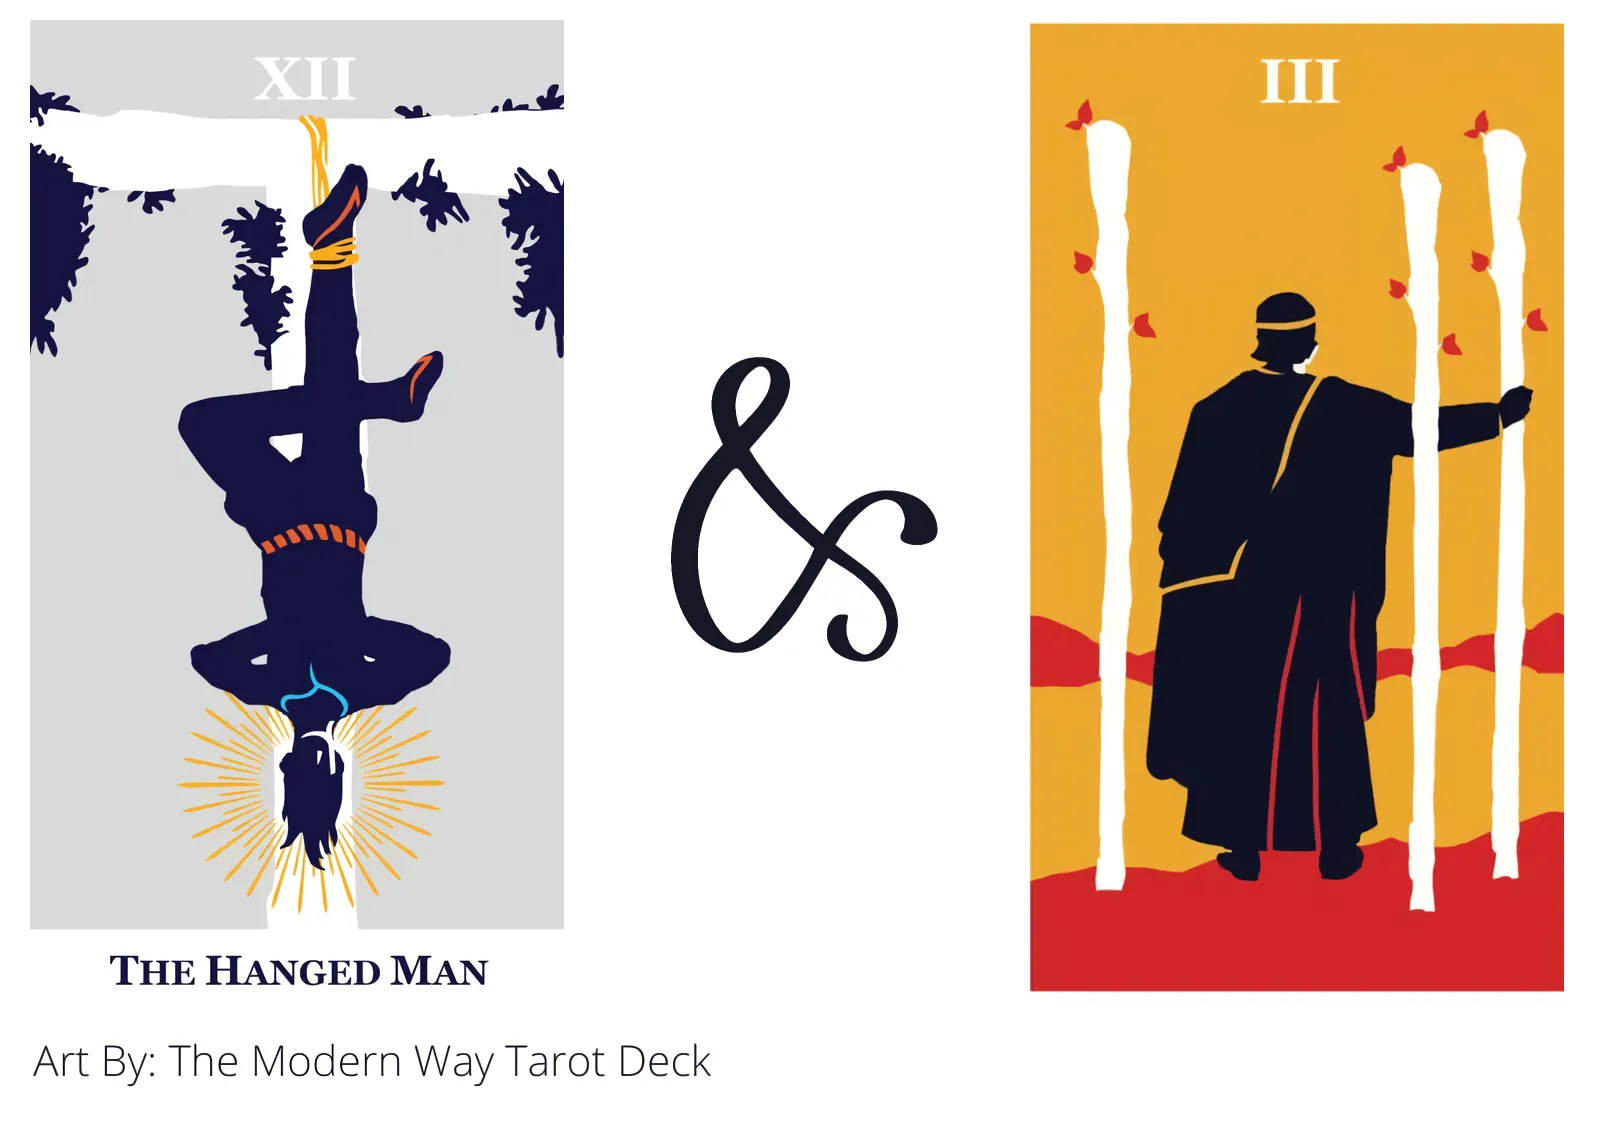 the hanged man and three of wands tarot cards together